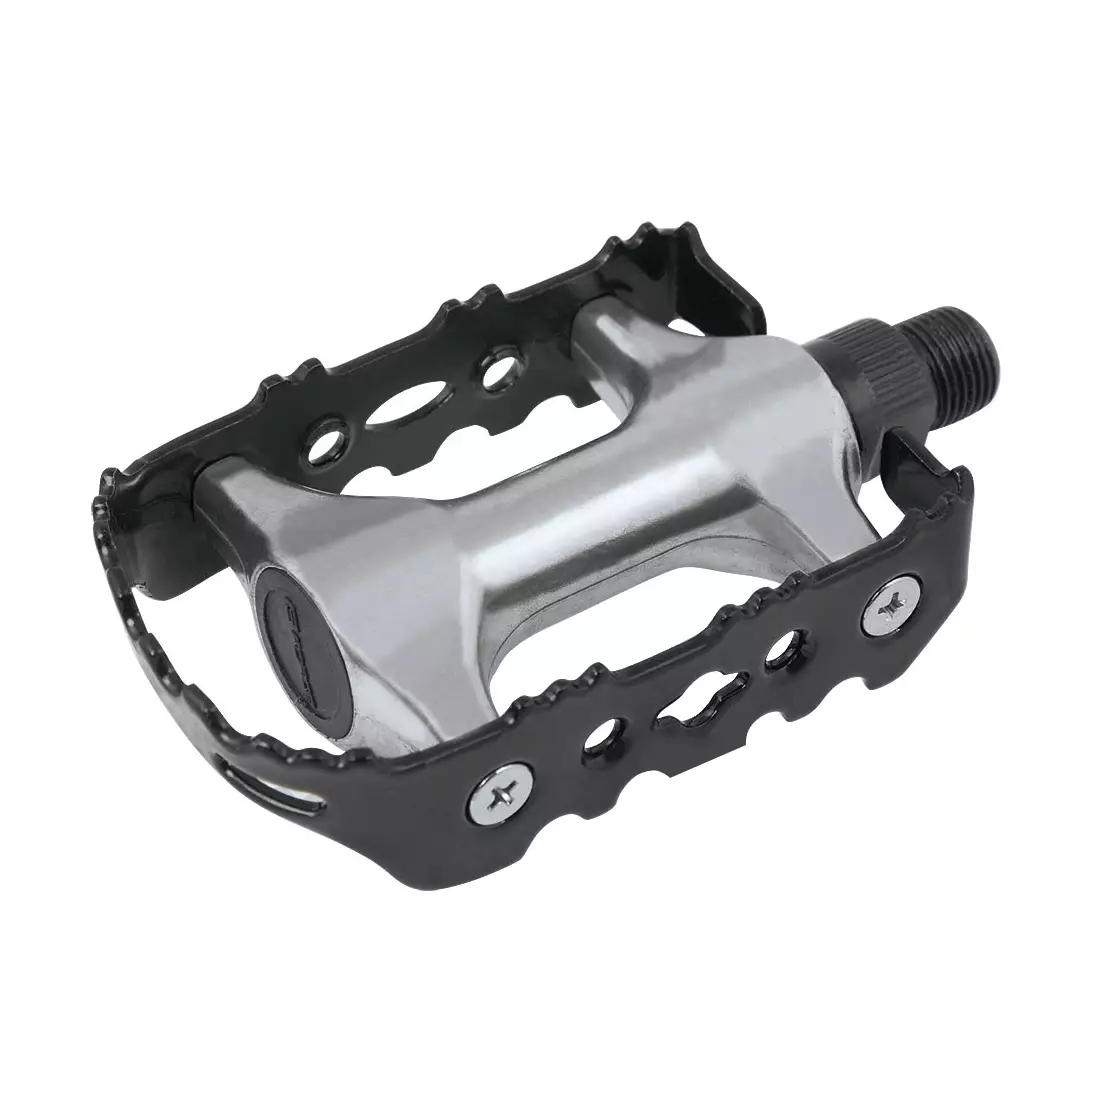 FORCE bicycle pedals 910 silver-black 67038